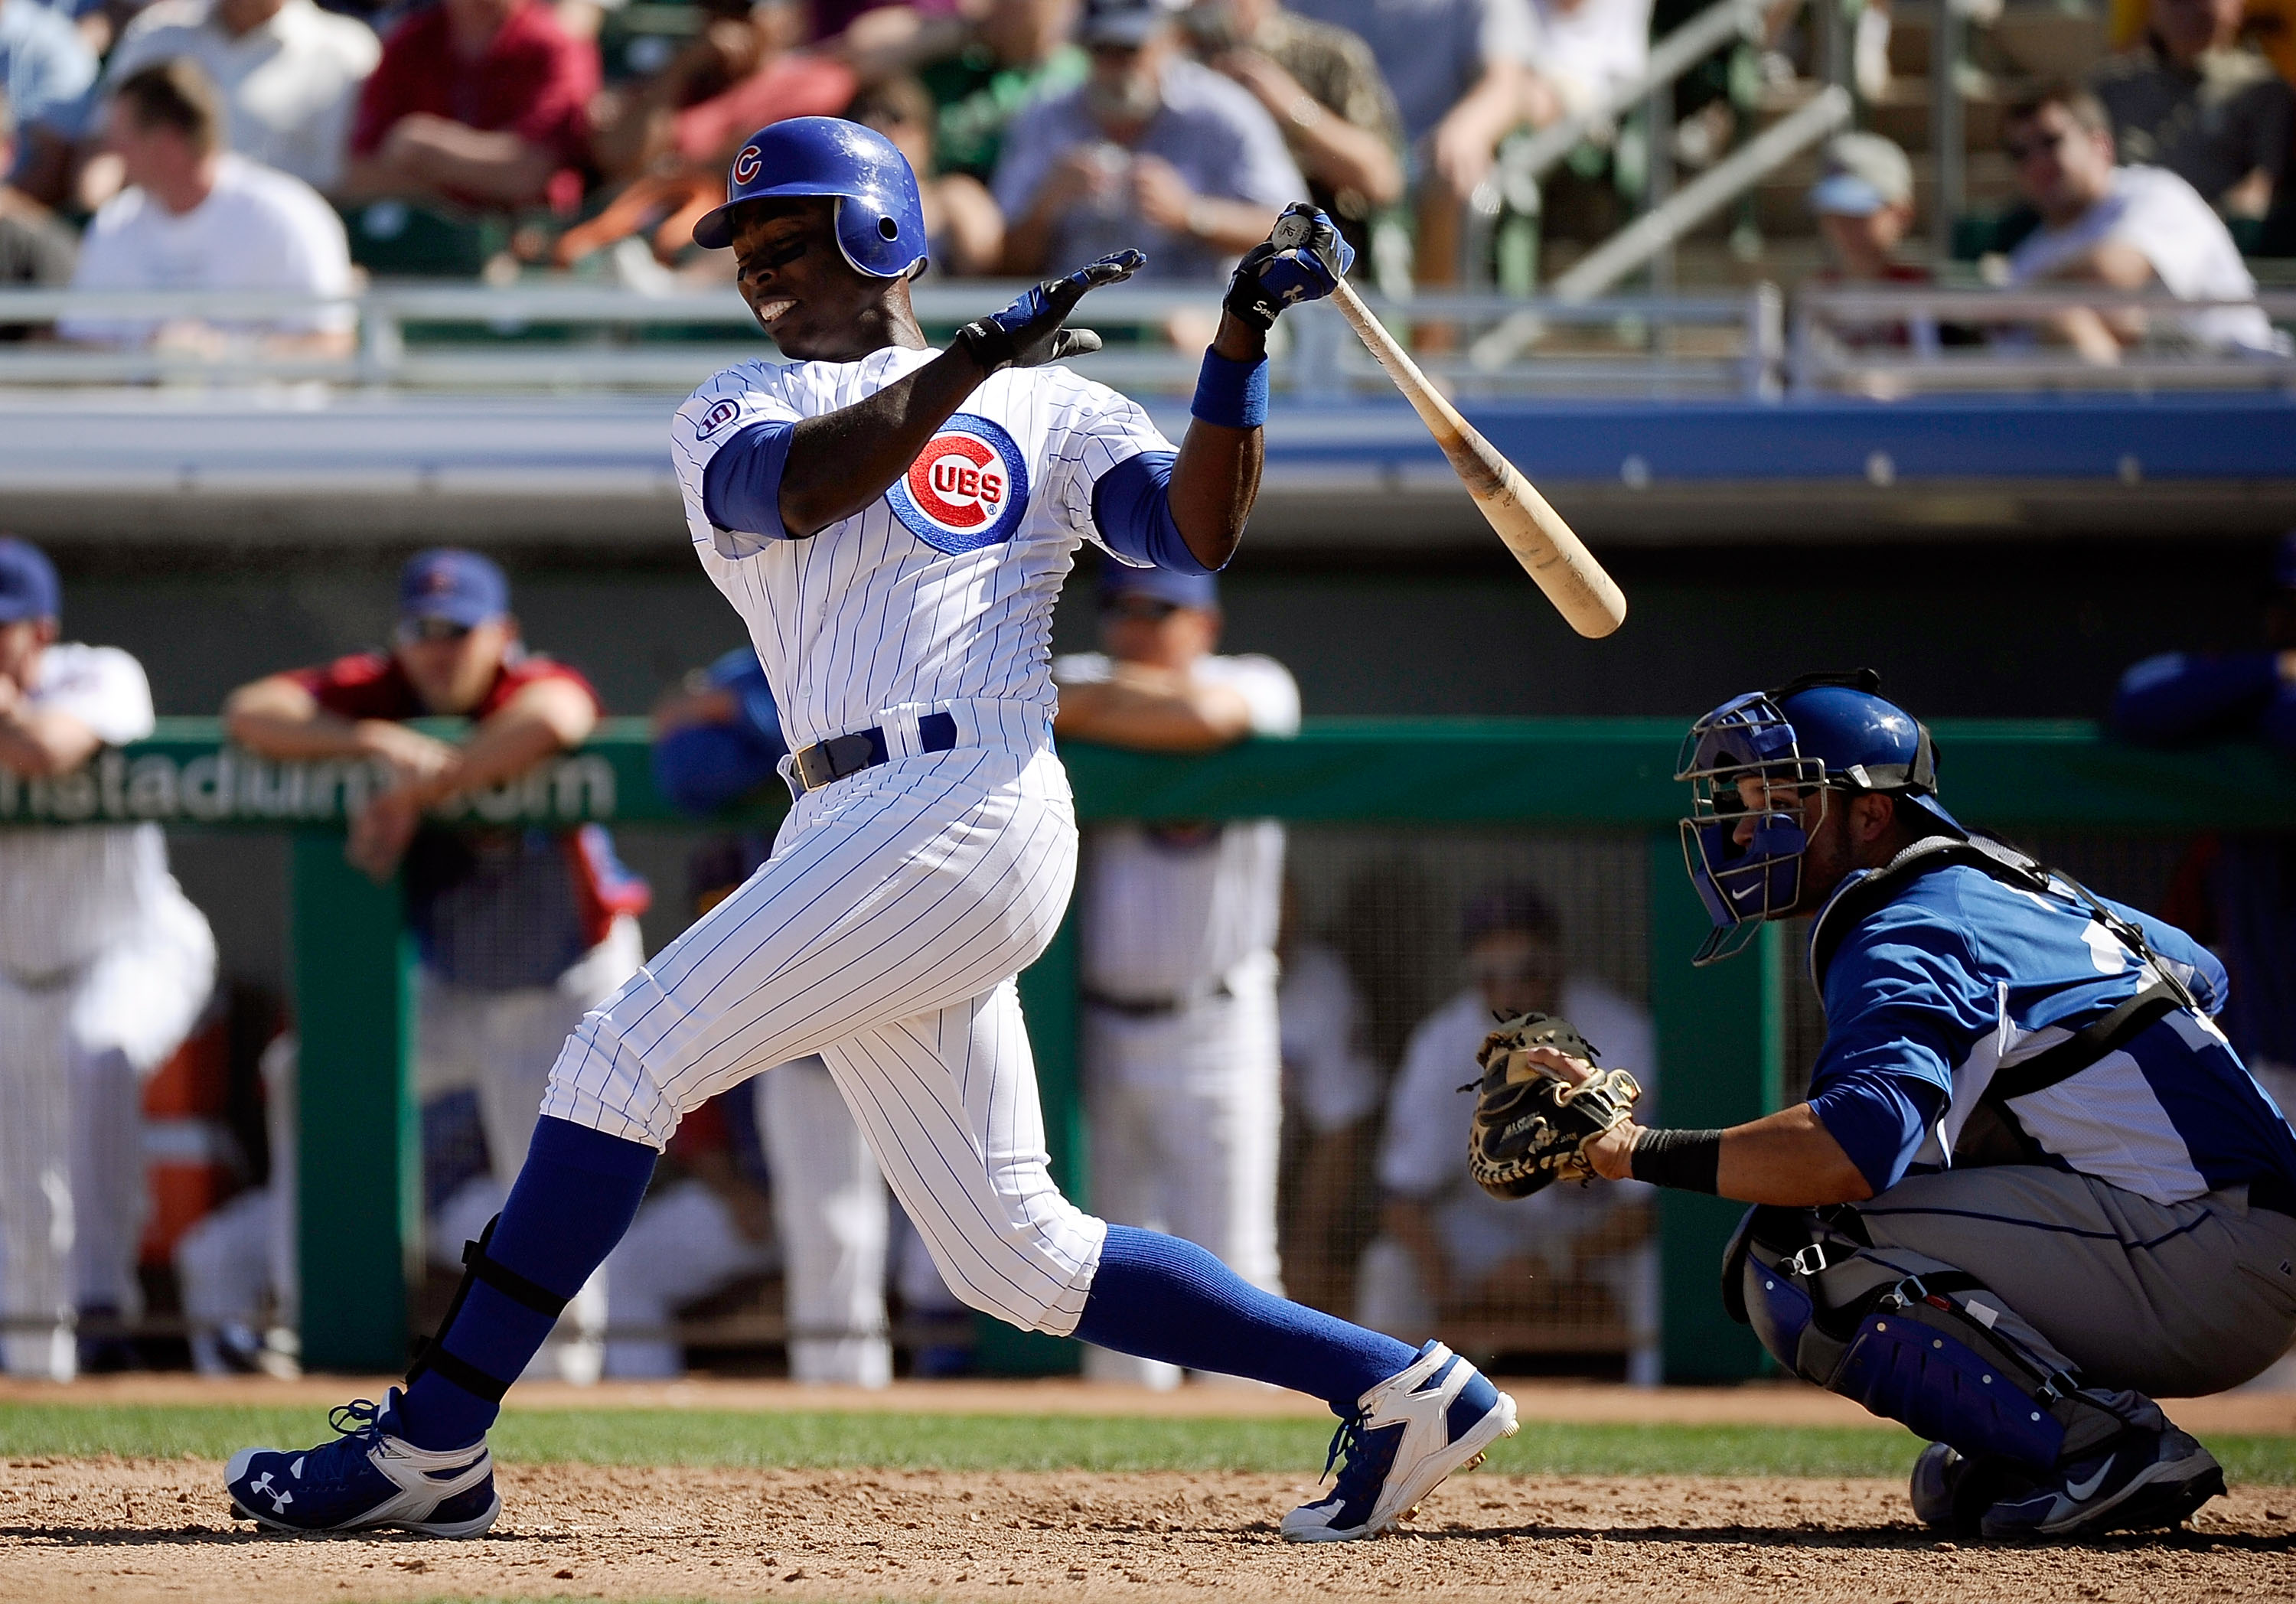 MESA, AZ - MARCH 09:  Alfonso Soriano #12 of the Chicago Cubs swings at a pitch against the Kansas City Royals during the spring training baseball game at HoHoKam Stadium on March 9, 2011 in Mesa, Arizona.  (Photo by Kevork Djansezian/Getty Images)